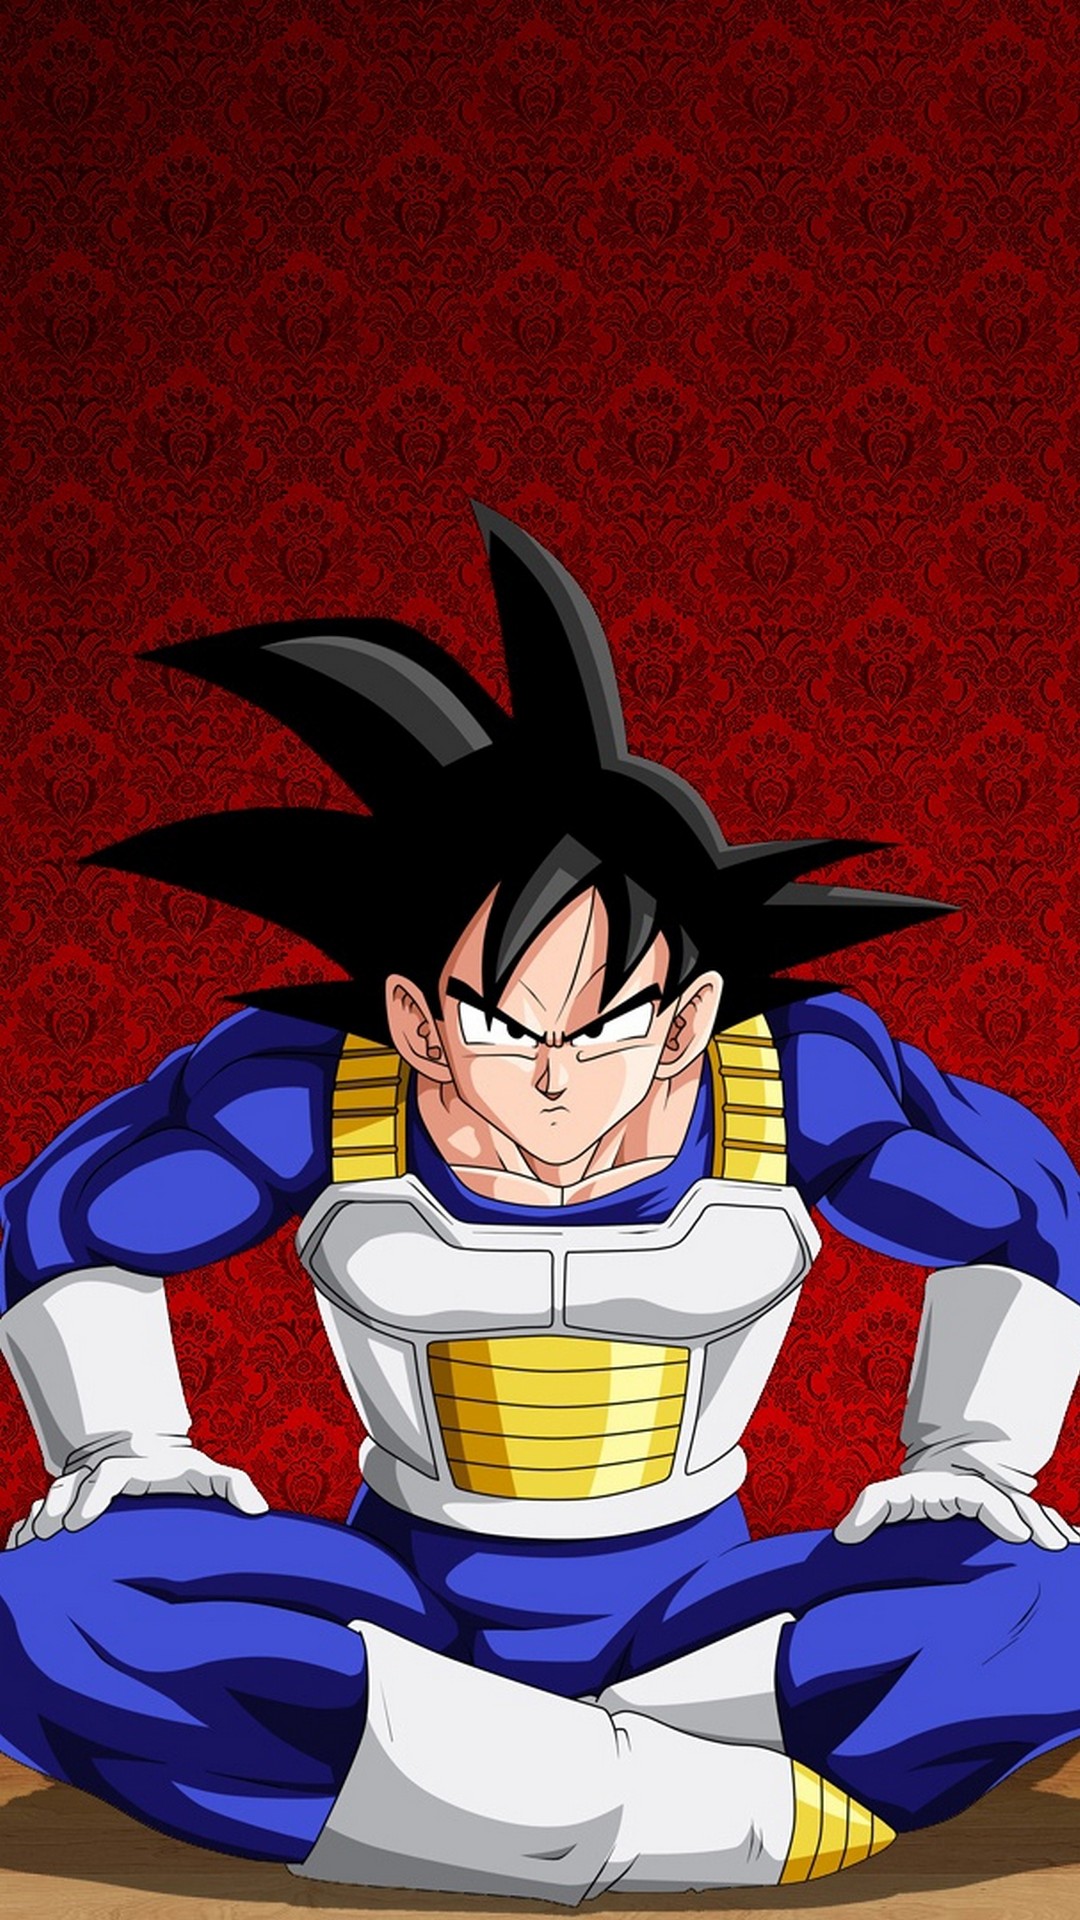 Goku Imagenes Wallpaper For Android with HD resolution 1080x1920